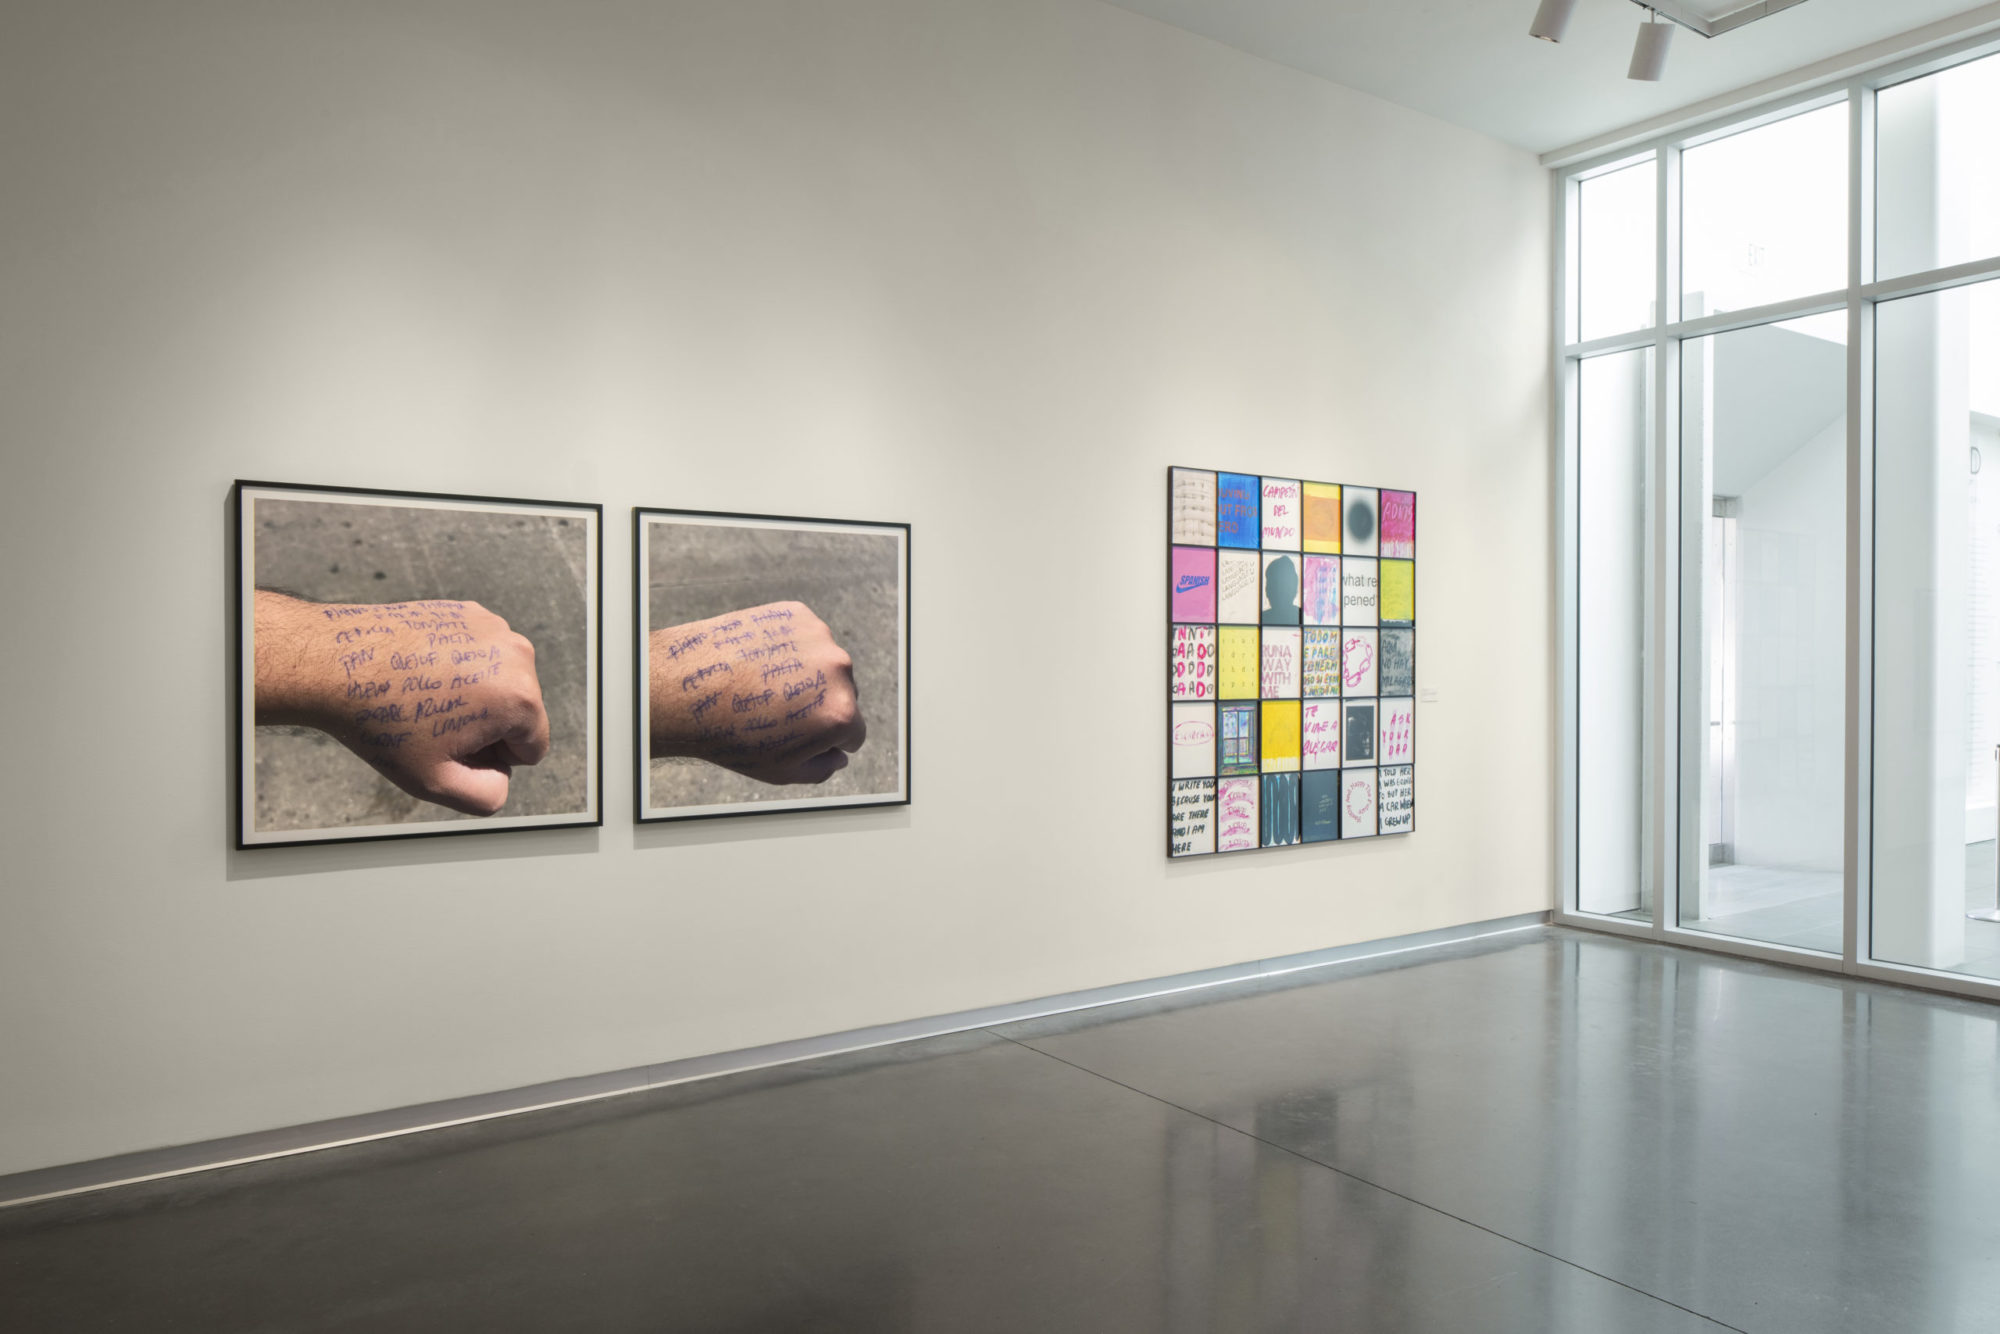 Corner of gallery with three wall-hangings, two large photographs of grocery list written on the back of a hand, grid of small mixed-media works printed and painted with text and abstract designs in black, bright pink, orange, and green